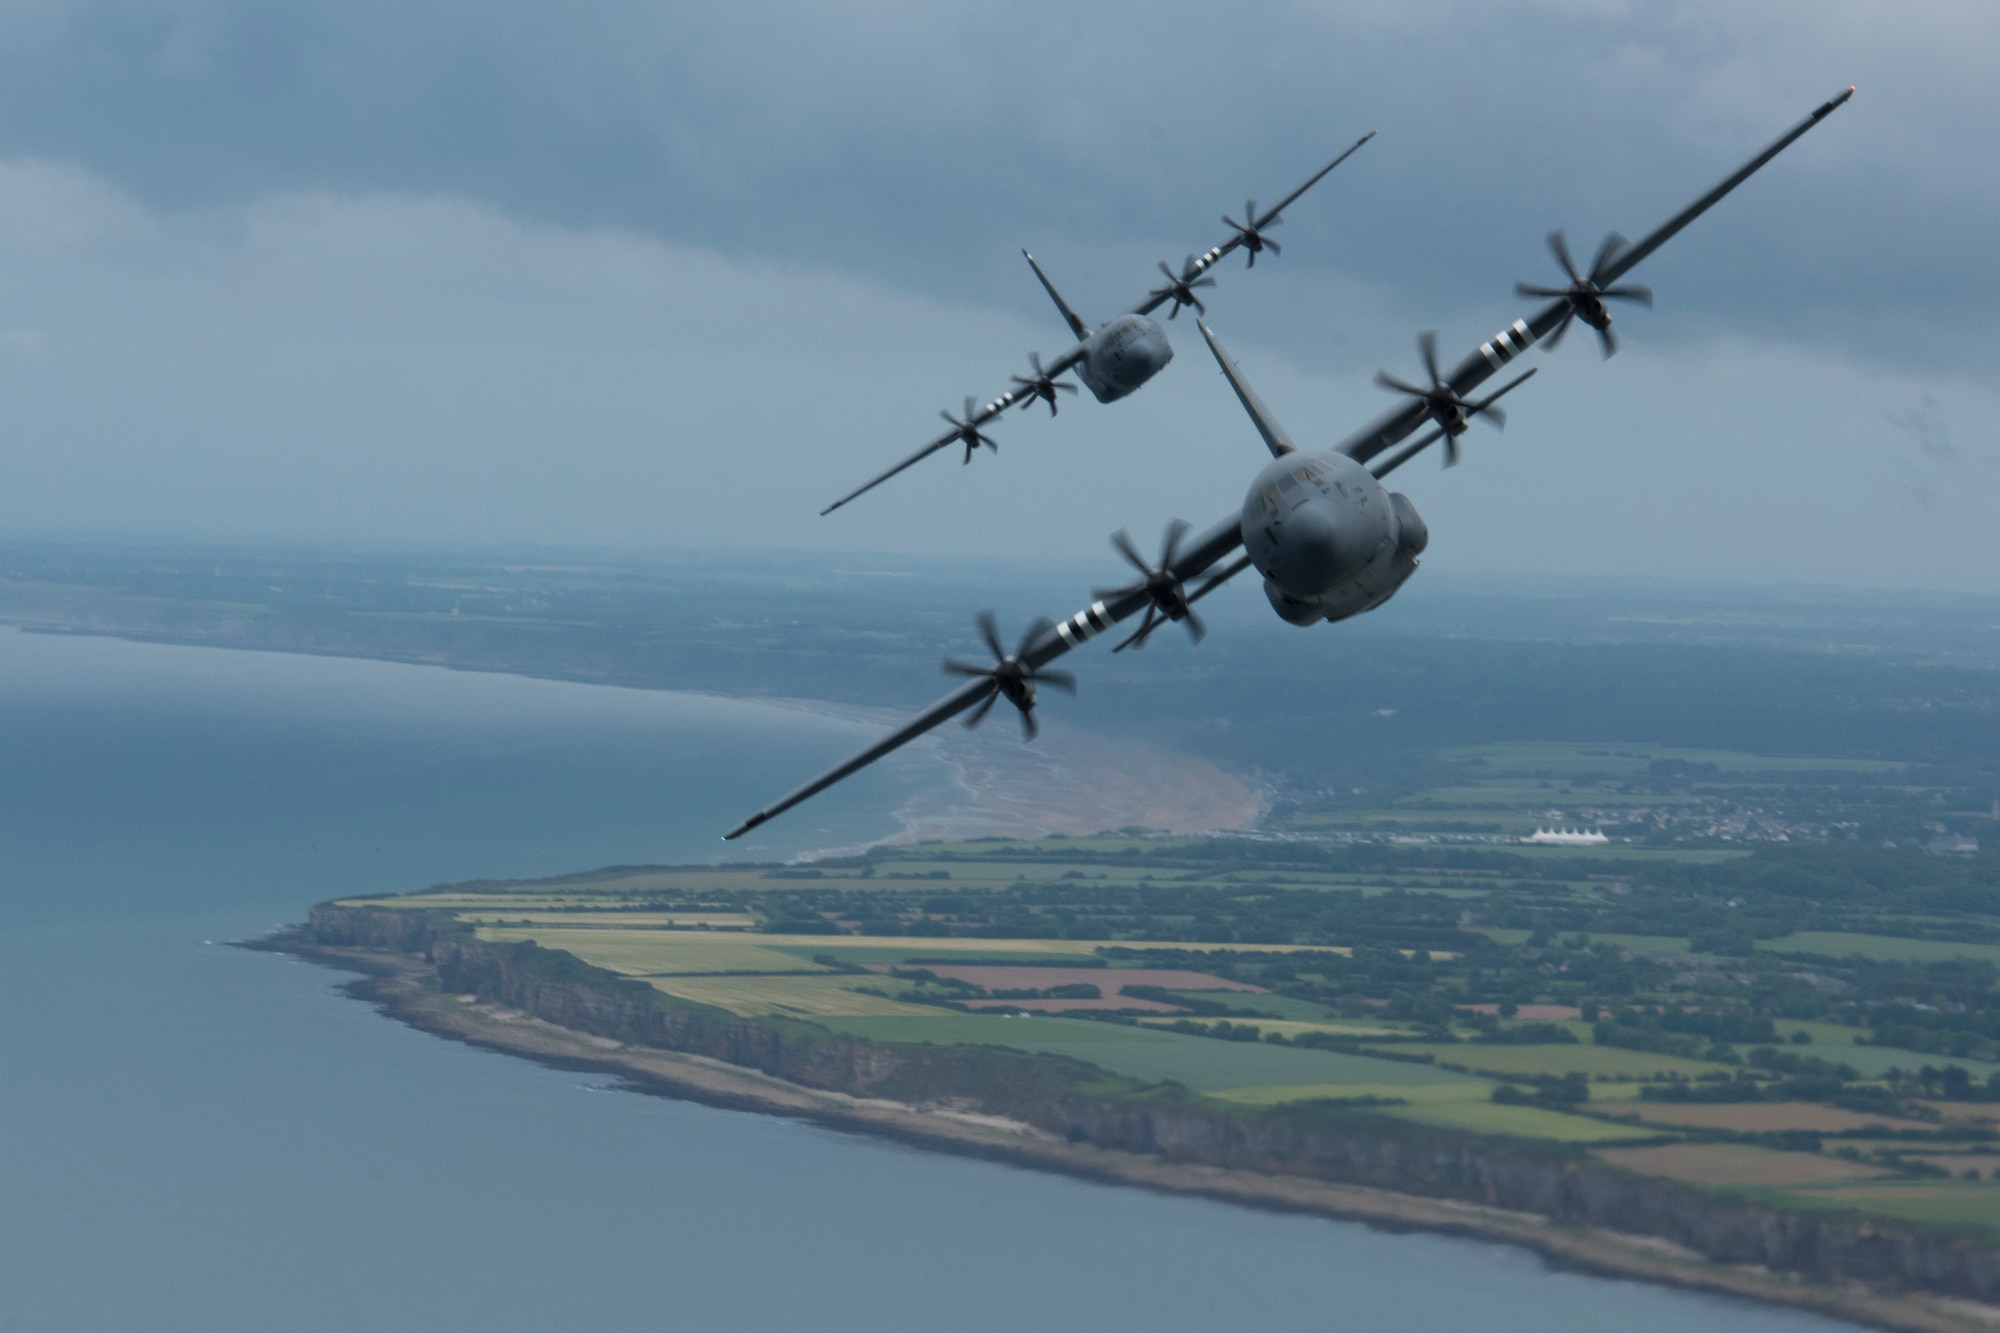 Two C-130J Super Hercules, belonging to the 37th Airlift Squadron on Ramstein Air Base, fly over Pointe-du-Hoc as part of a four-ship formation with a C-17 Globemaster III trailing a mile behind the formation in Normandy, France, June 5, 2019. Pointe-du-Hoc, coastal land featuring a 100 foot cliff overlooking the Atlantic Ocean, provided the highest vantage point between the American landing sectors at Utah and Omaha Beach on D-Day, June 6, 1944. The German army heavily fortified Pointe-du-Hoc as a result. Axis defenses notwithstanding, the U.S. Army Ranger Assault Group scaled the 100 foot cliff and soon after captured Pointe-du-Hoc. (U.S. Air Force photo by Senior Airman Kristof J. Rixmann)